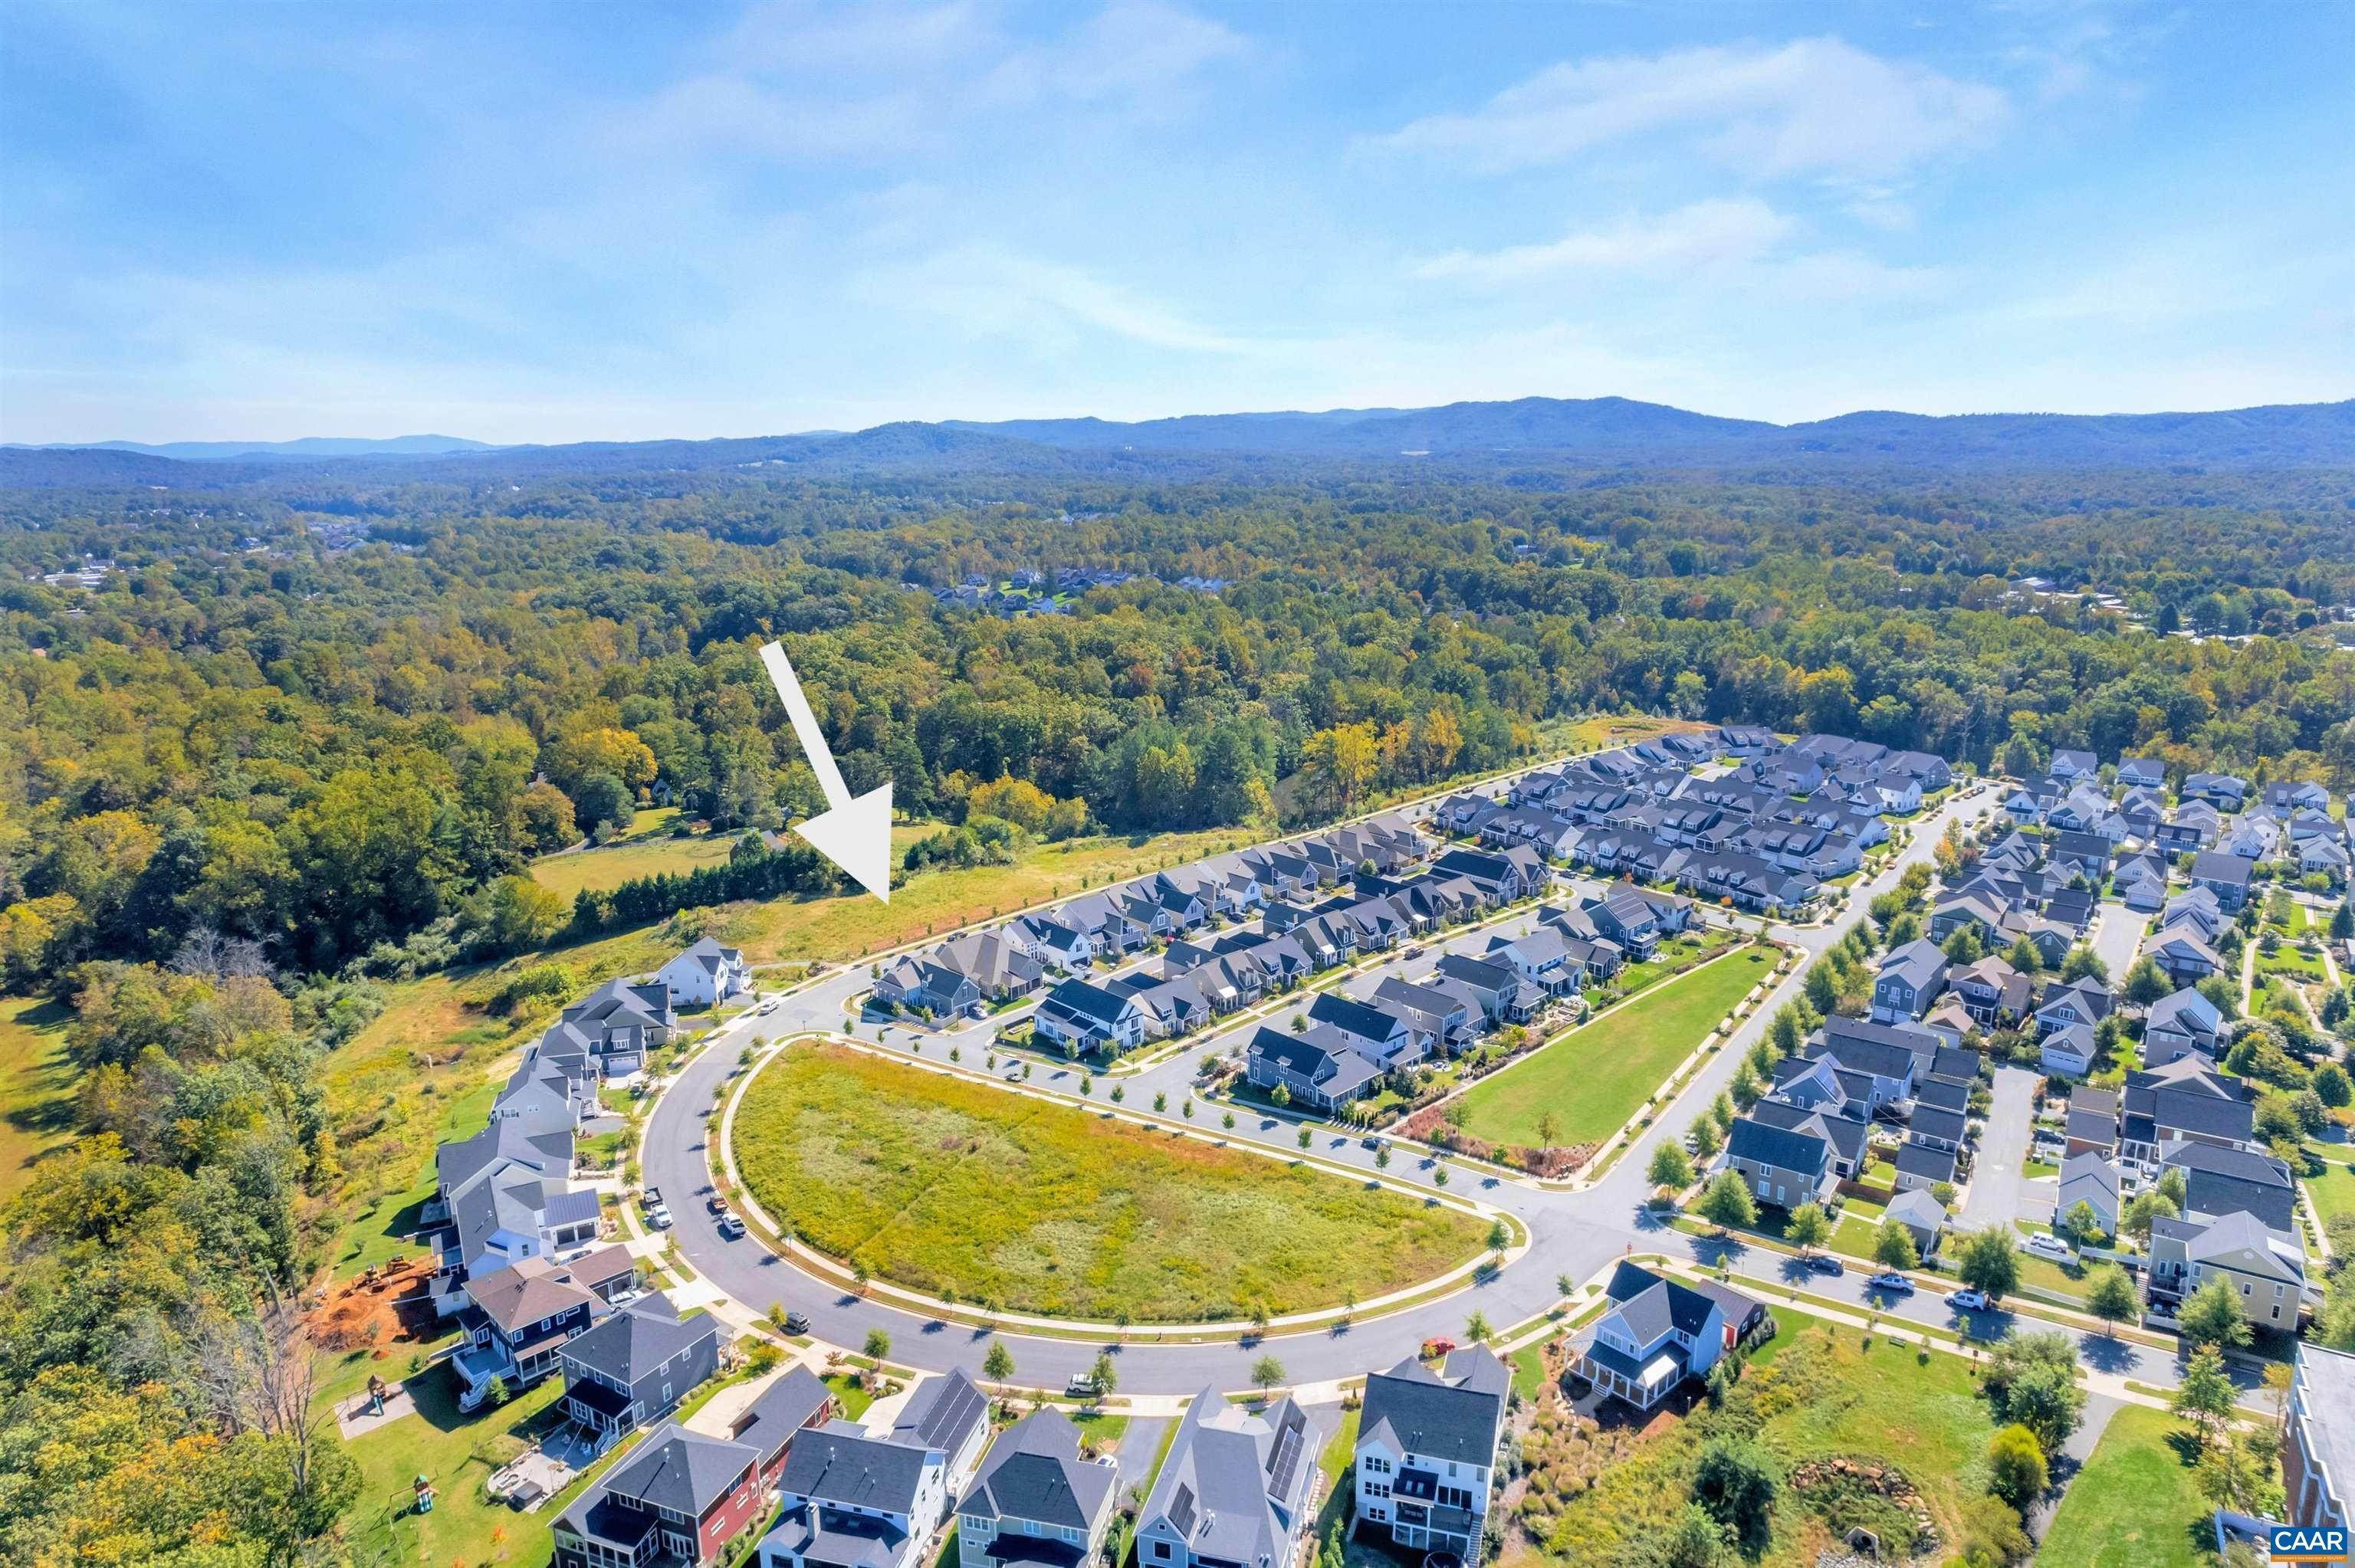 Single Family Homes for Sale at 31C ROWCROSS ST #Lot 1 Crozet, Virginia 22932 United States